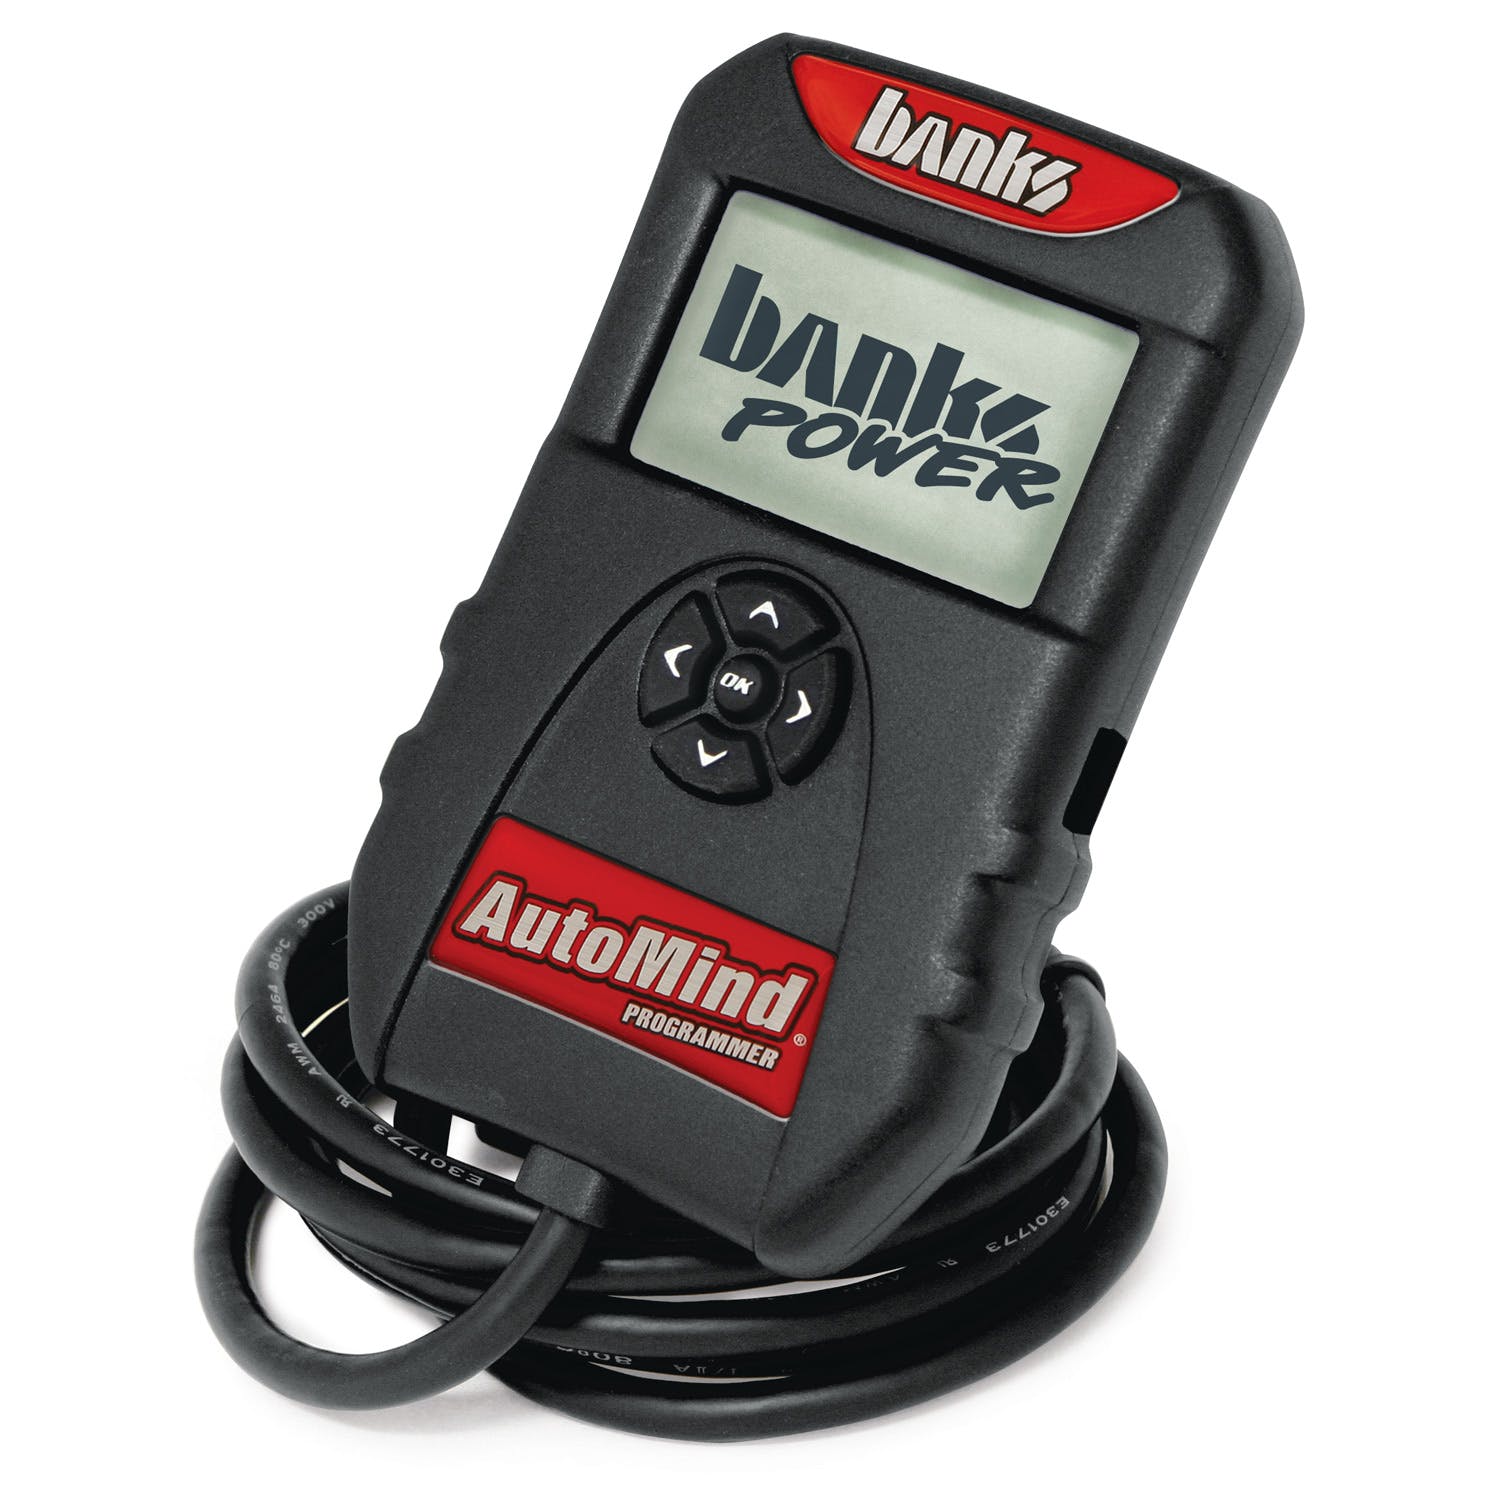 Banks Power 66102 AutoMind Programmer; Hand Held-2011-12 Ford F-150; 3.5L EcoBoost